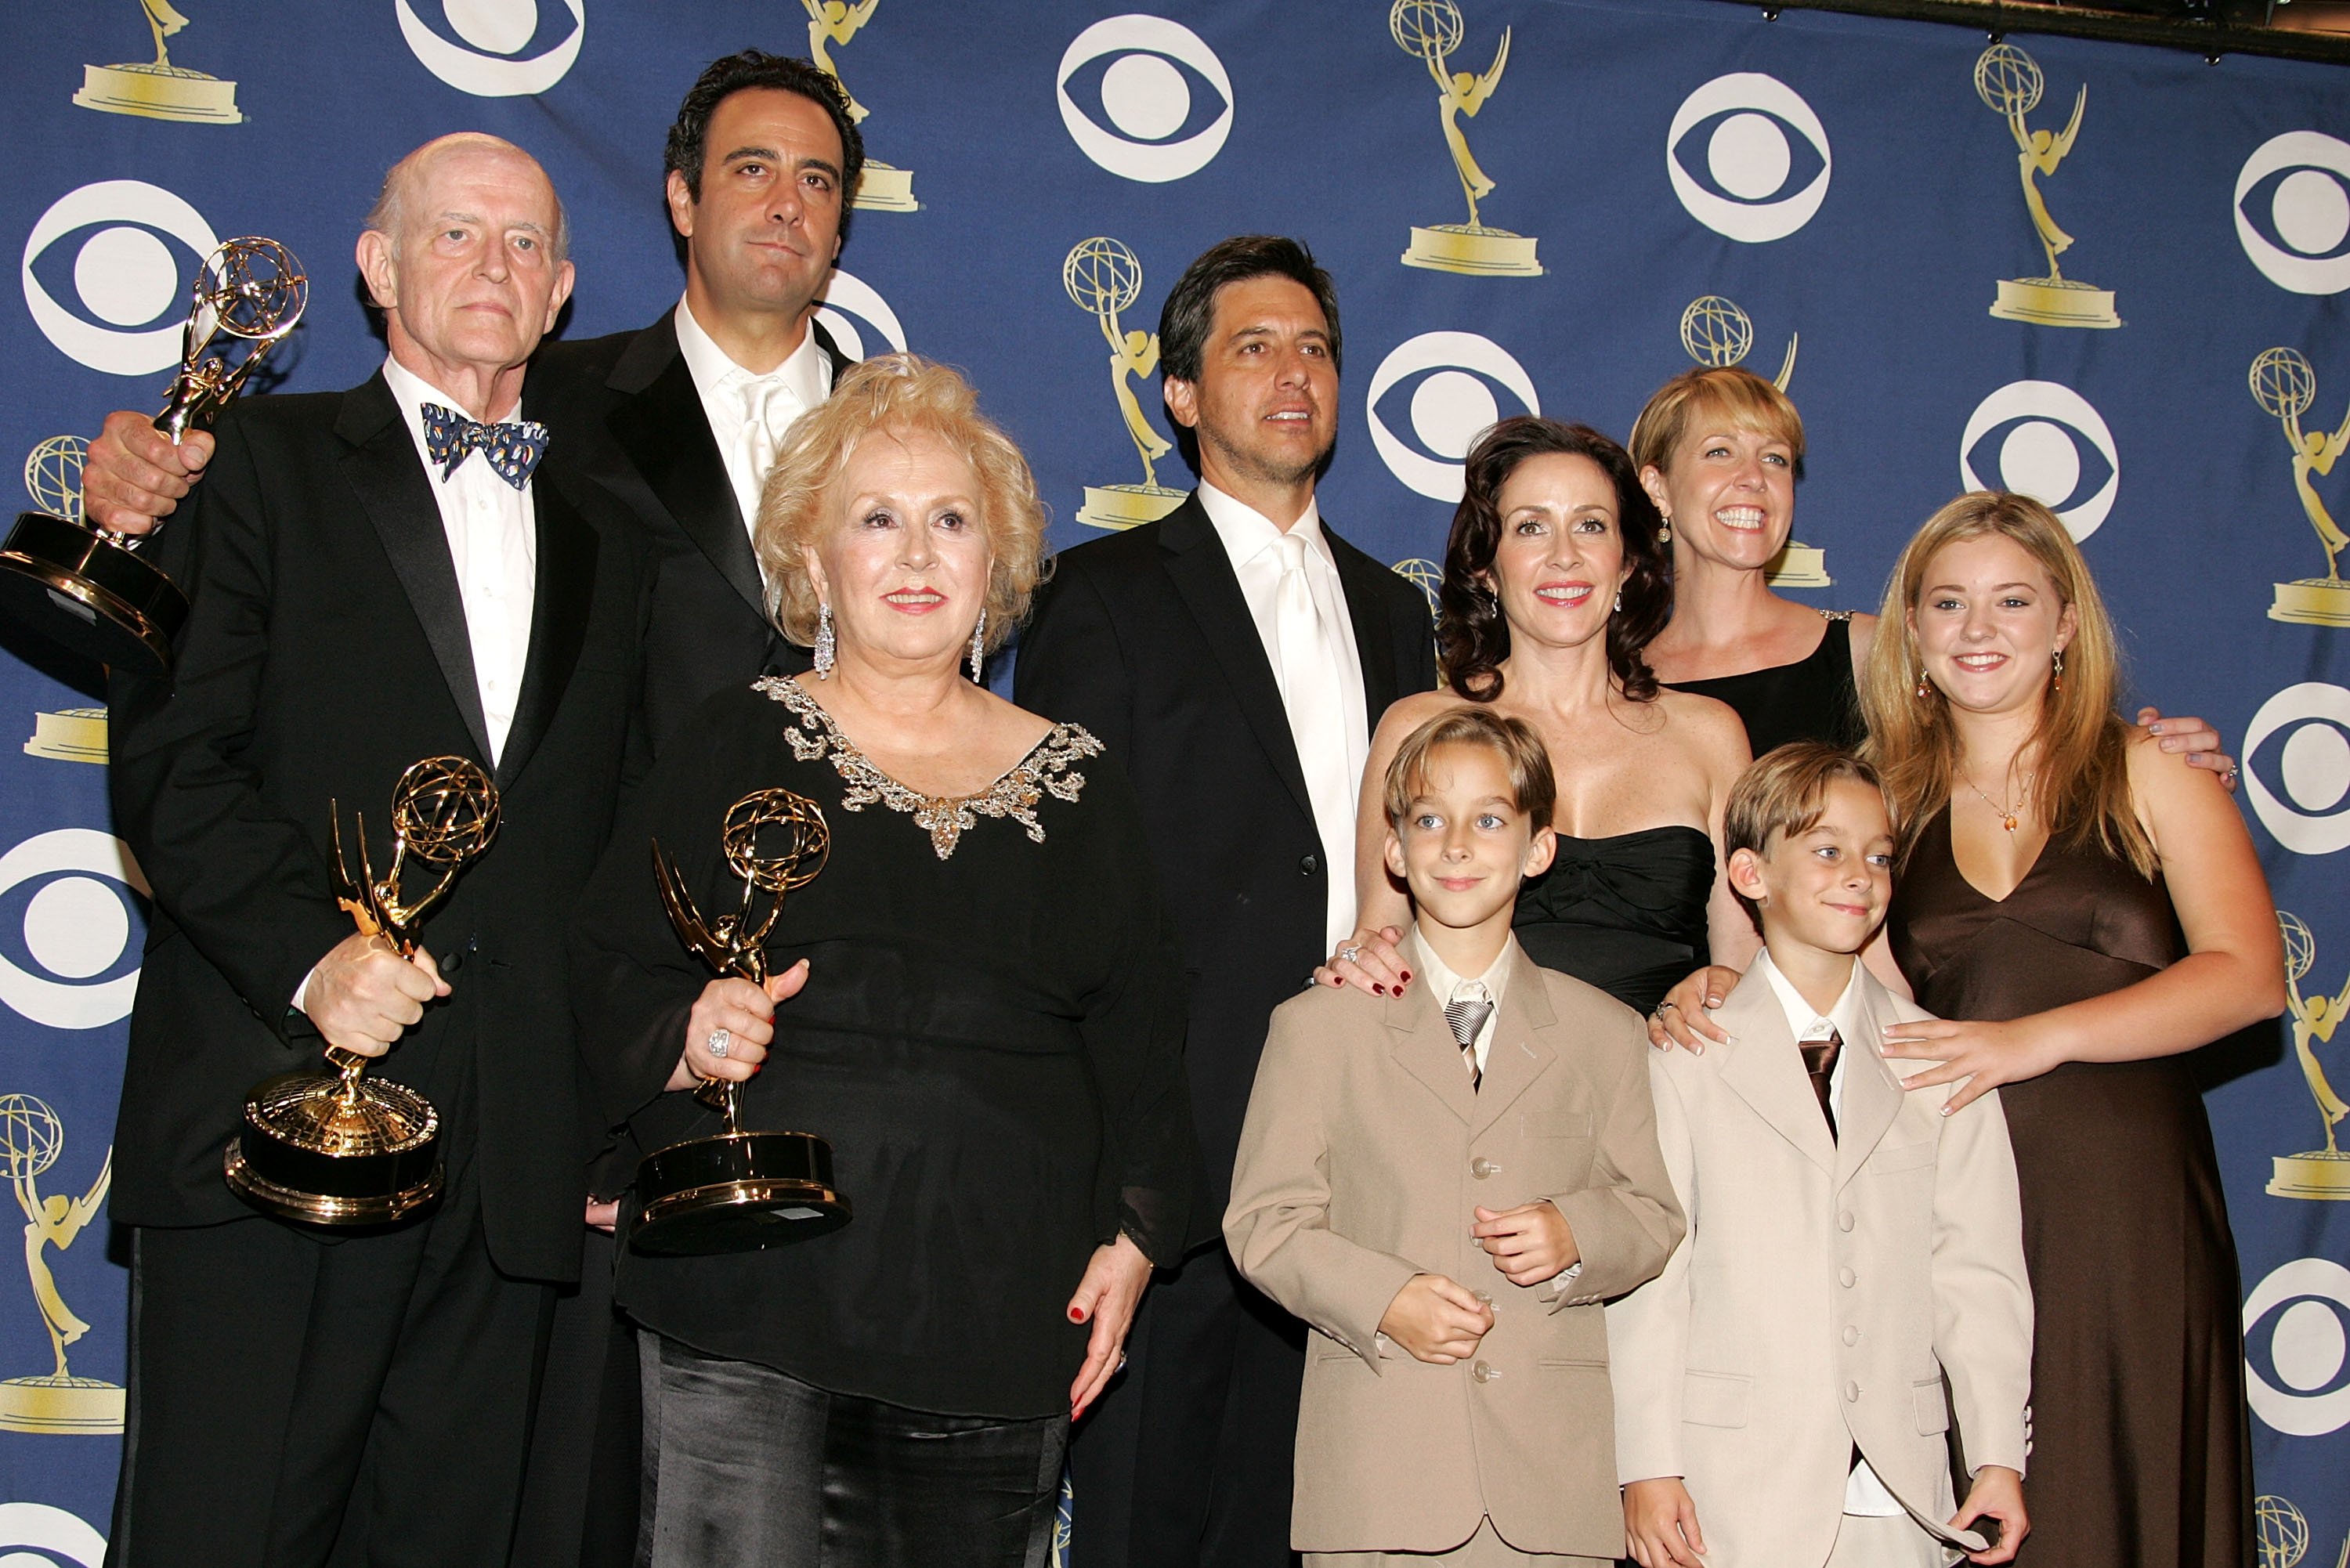 The cast of 'Everybody Loves Raymond', (L-R) Peter Boyle, Brad Garrett, Doris Roberts, Ray Romano, Patricia Heaton, Monica Horan, Sawyer Sweeten, Sullivan Sweeten and Madylin Sweeten pose with the Emmy for Outstanding Comedy Series in the press room at the 57th Annual Emmy Awards held at the Shrine Auditorium on September 18, 2005 in Los Angeles, California. | Source: Getty Images